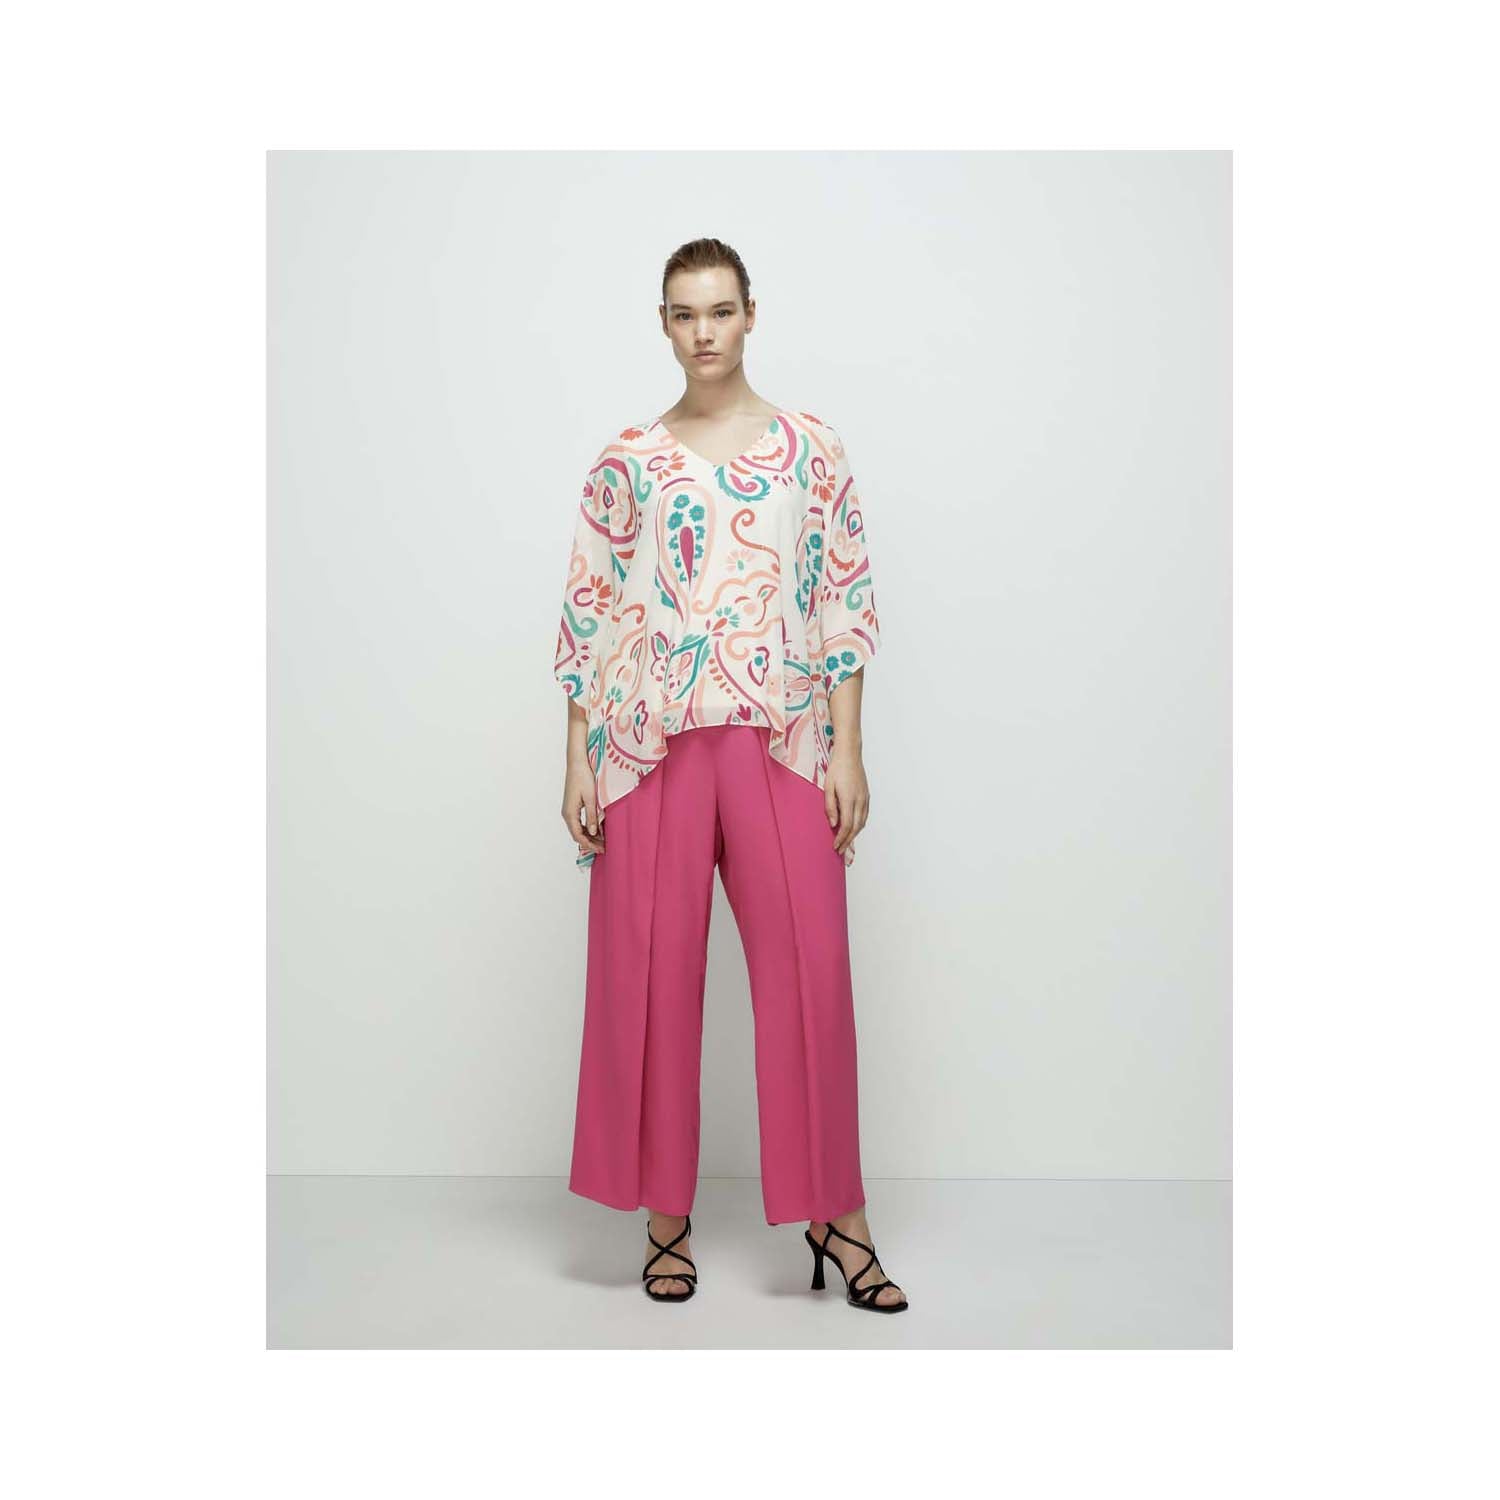 Couchel Plain-Coloured Loose-Fitting Wide-Leg Trousers - Fuchsia 1 Shaws Department Stores